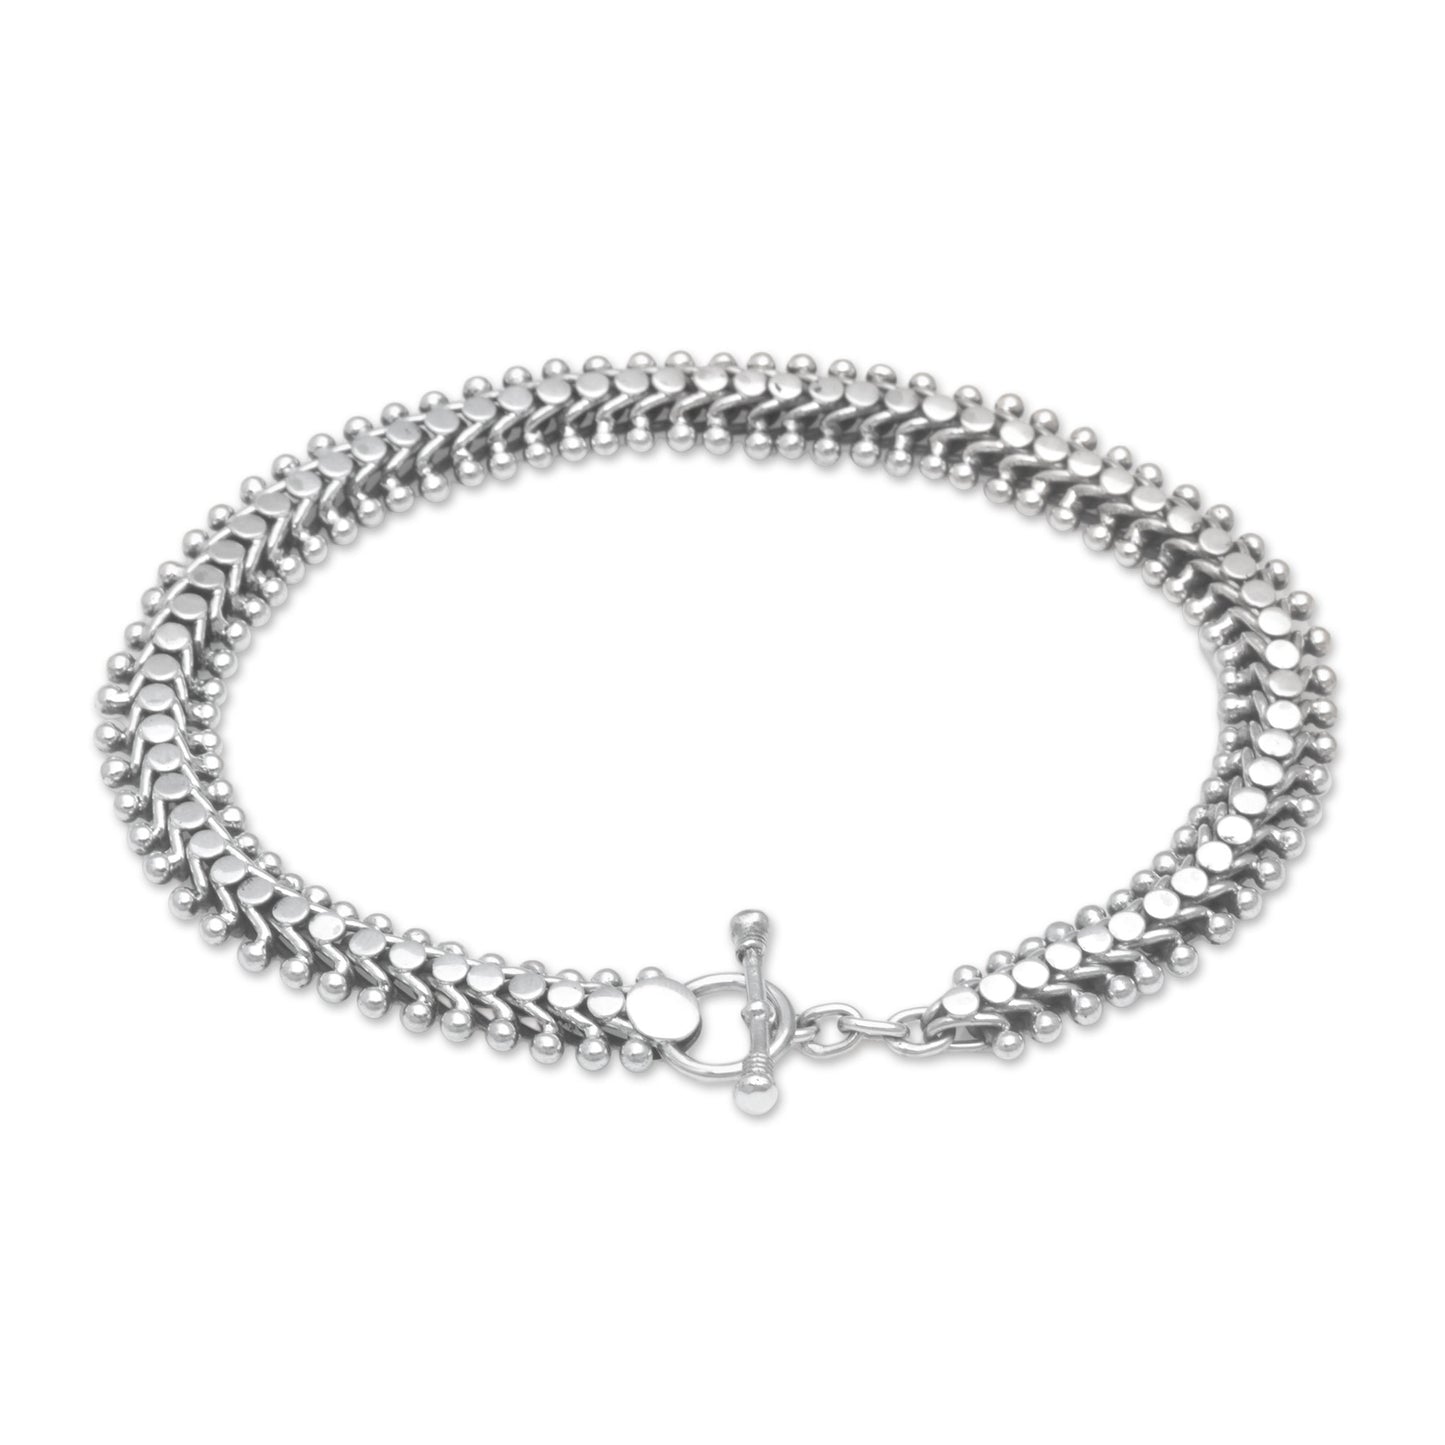 Centipede Crawl Handcrafted Balinese Sterling Silver Anklet